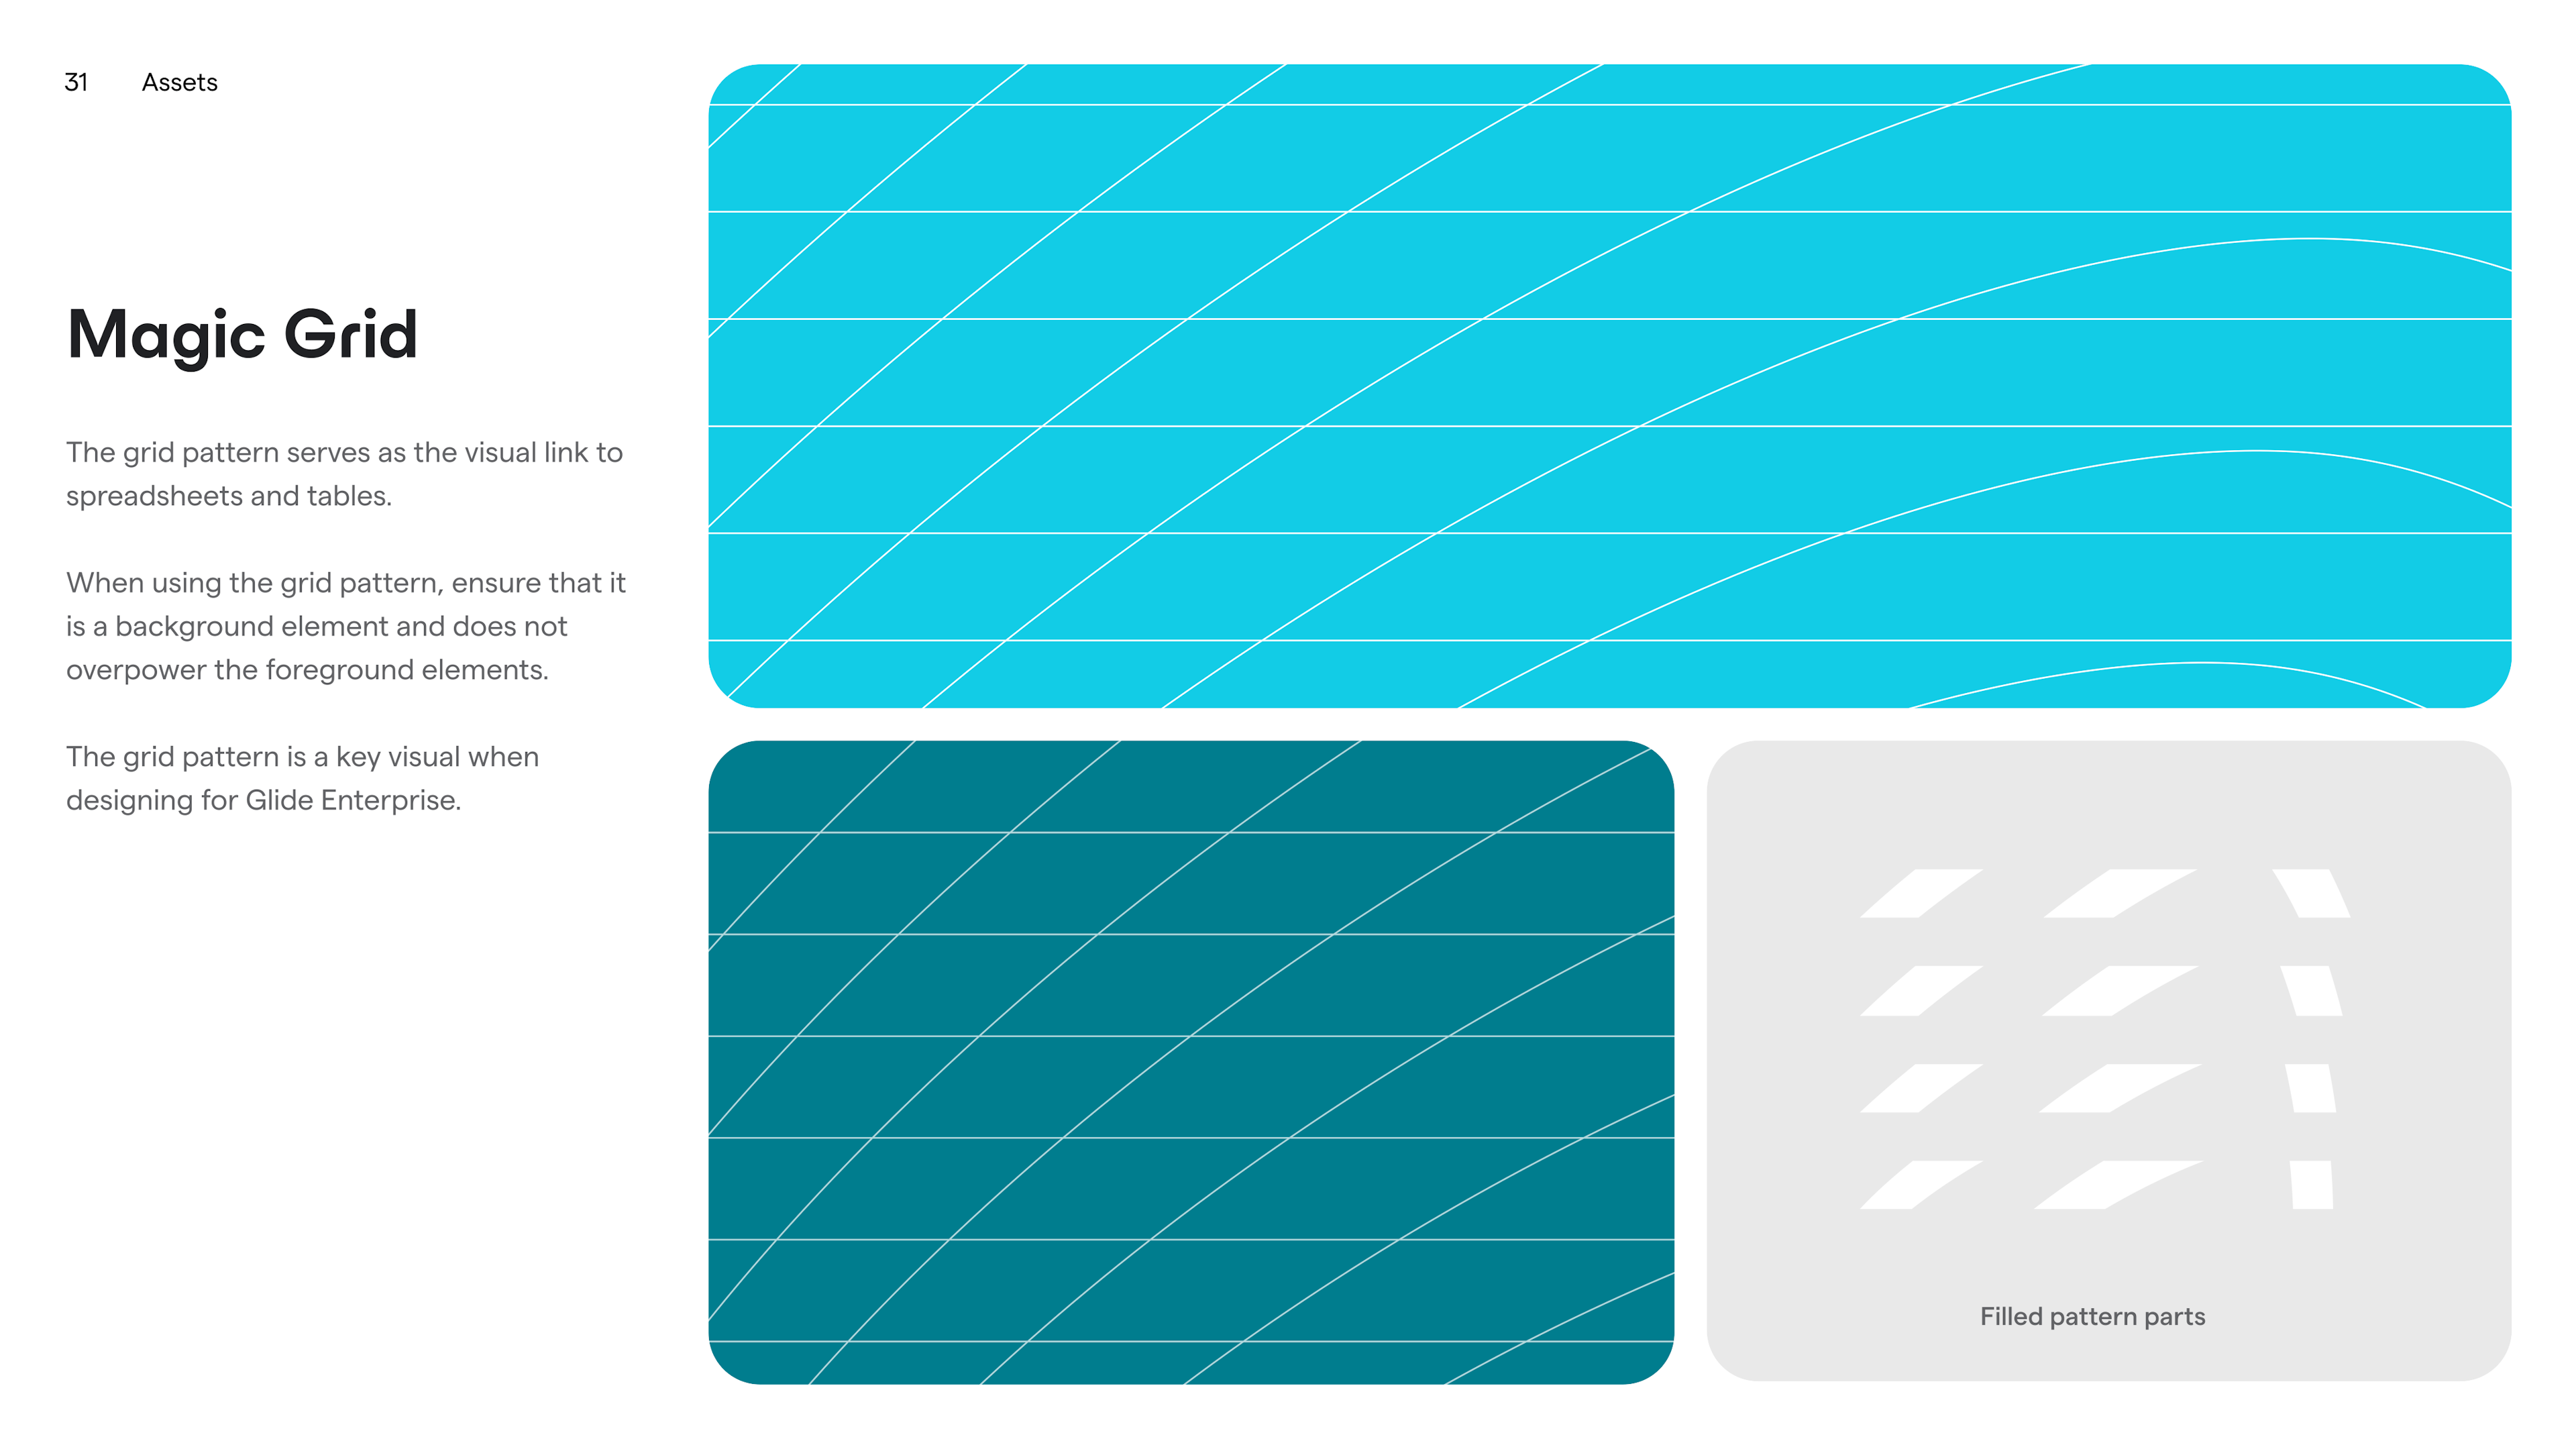 Glide brand guidelines